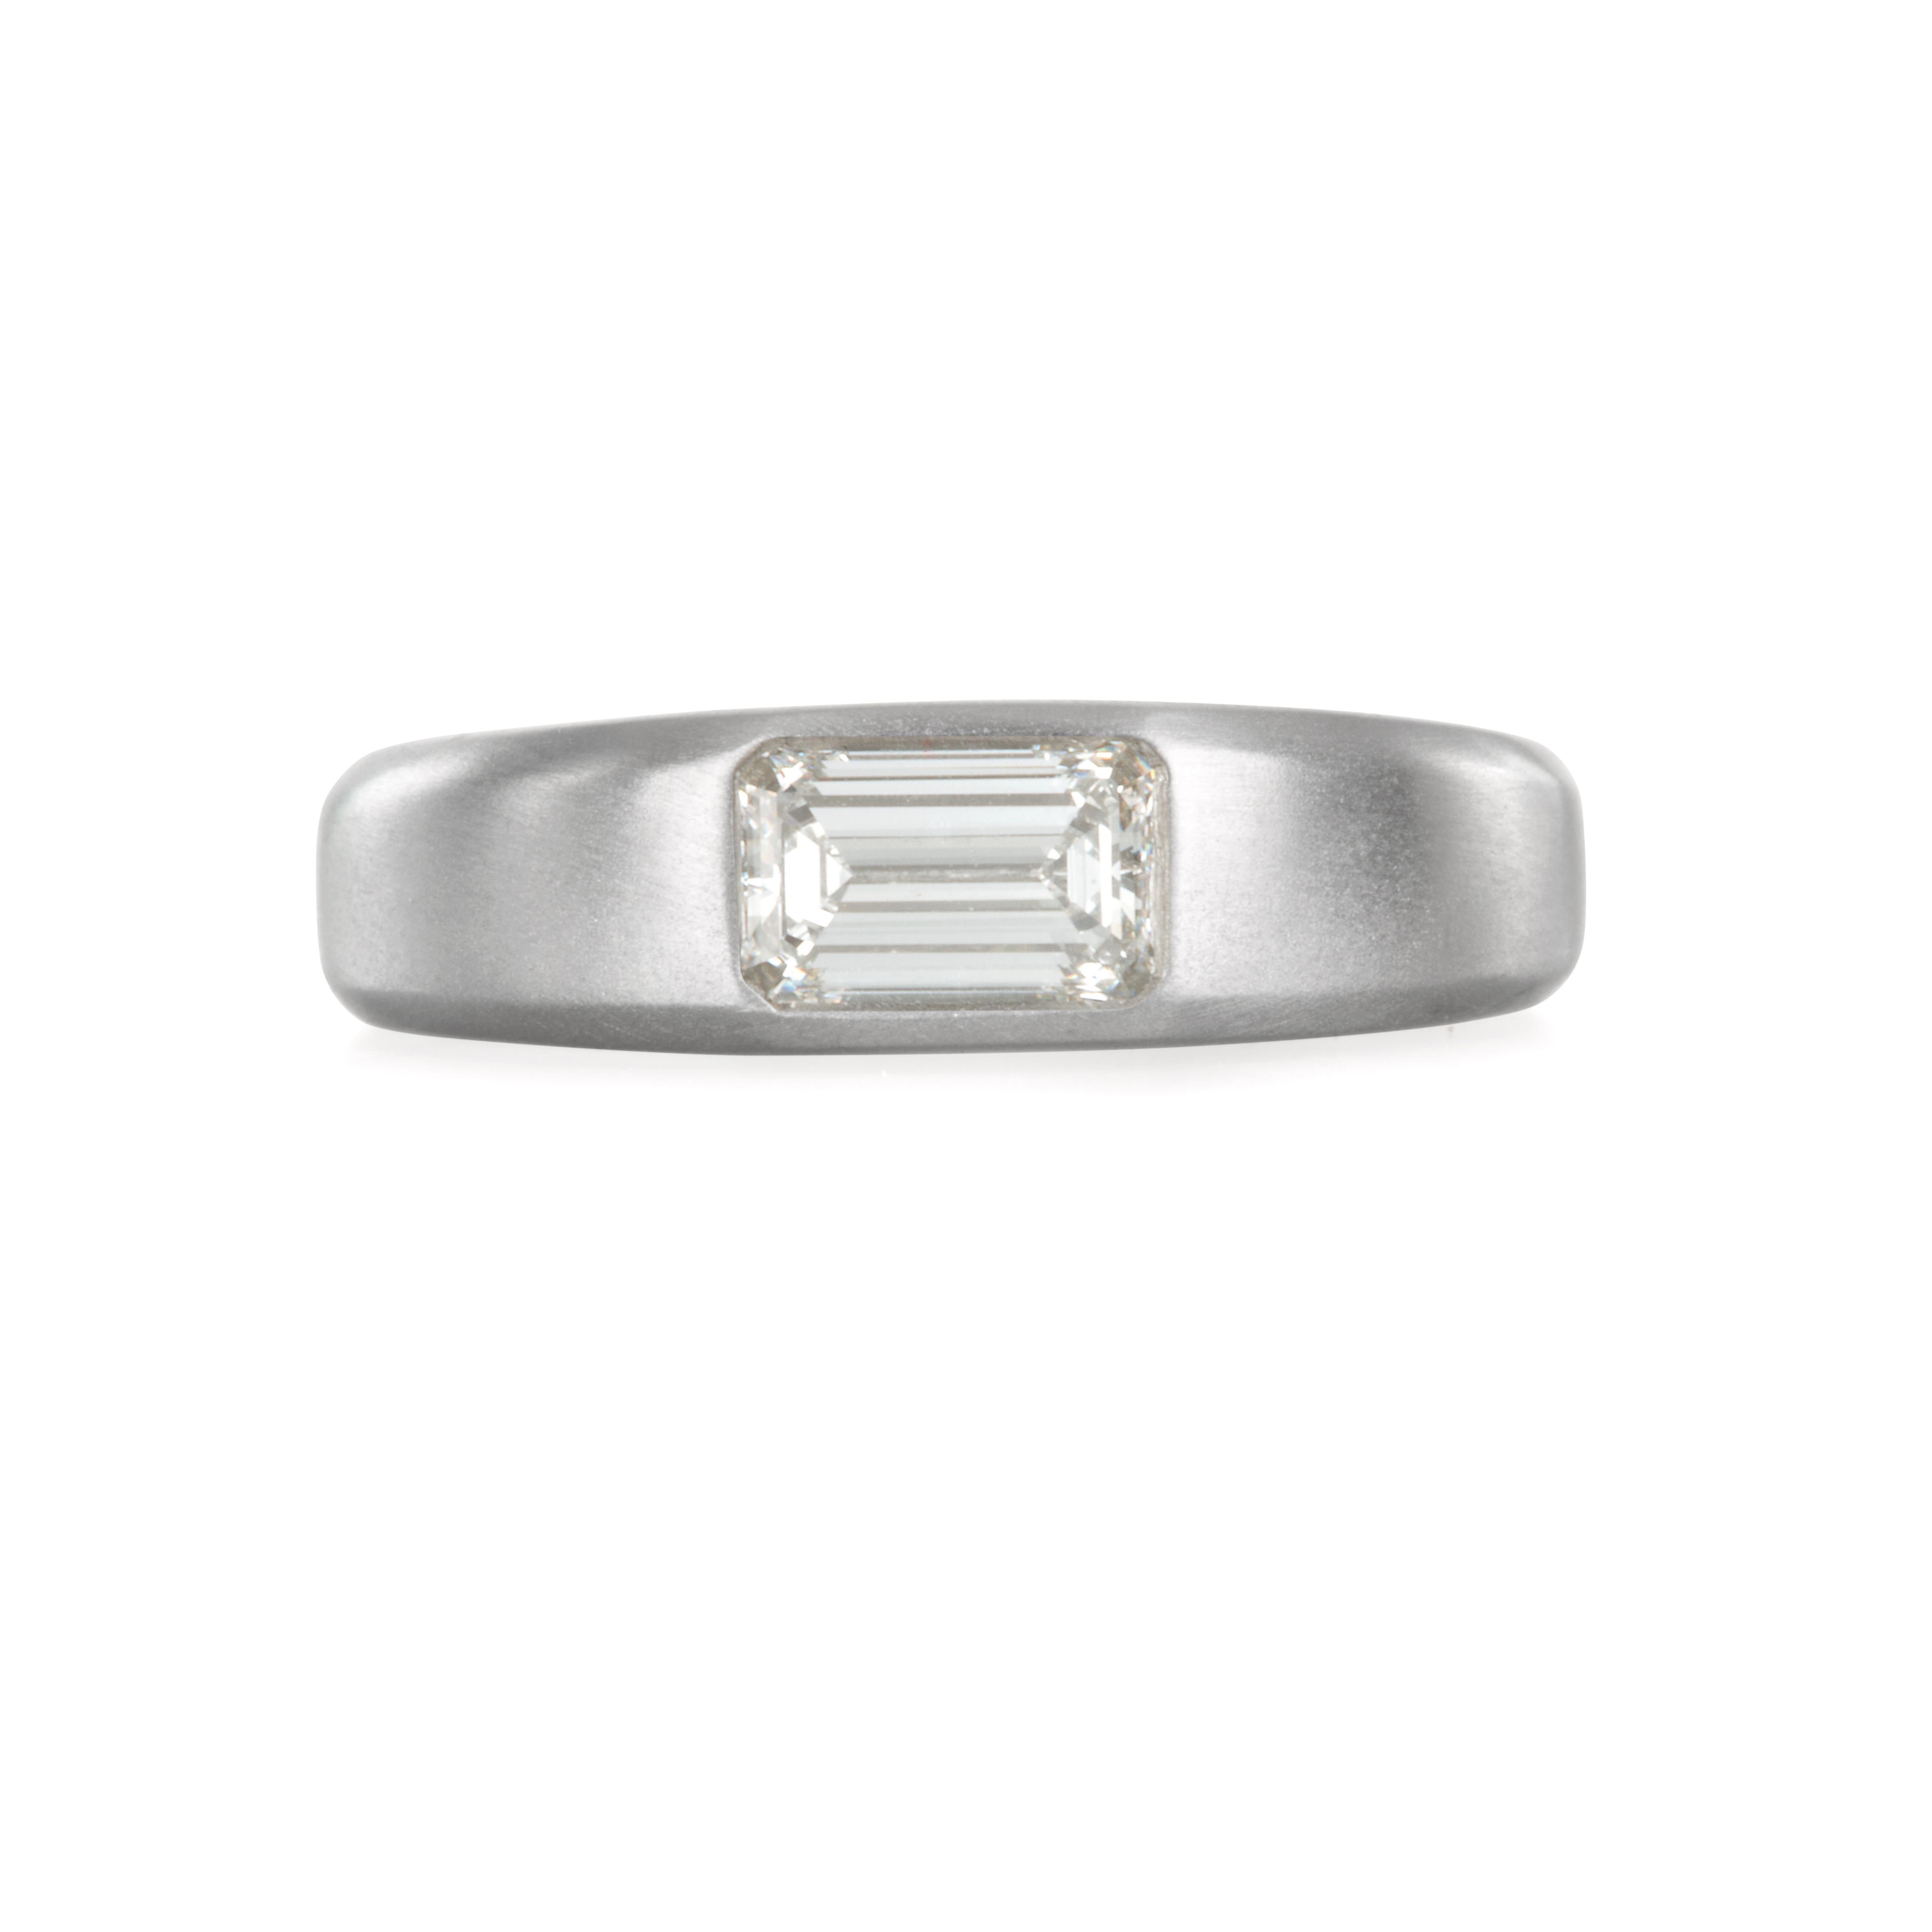 The ultimate statement of luxury and style.  Platinum modern engagement ring or stack ring featuring the crisp and clean lines of an emerald cut diamond.  Forge your own style and never settle for average.  Matte-finished.  

Size 6.25
Diamond =